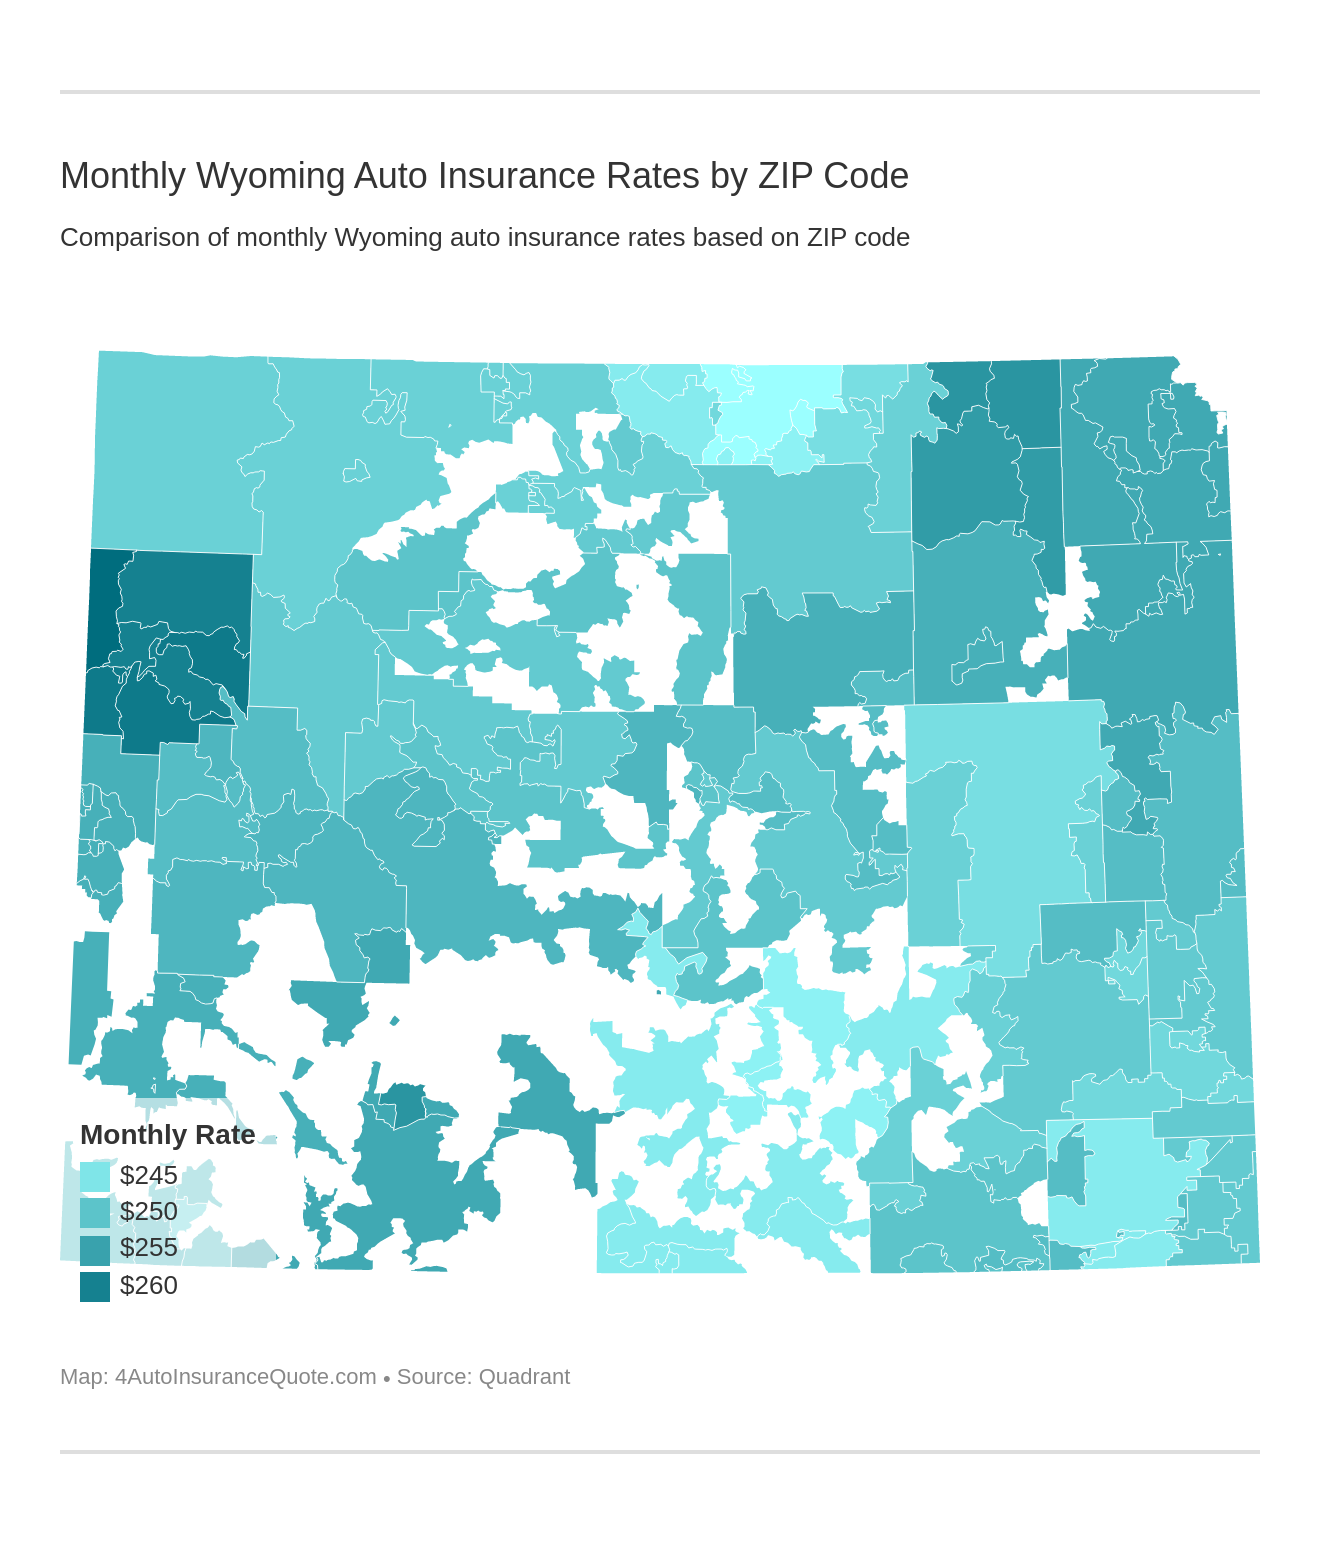 Monthly Wyoming Auto Insurance Rates by ZIP Code